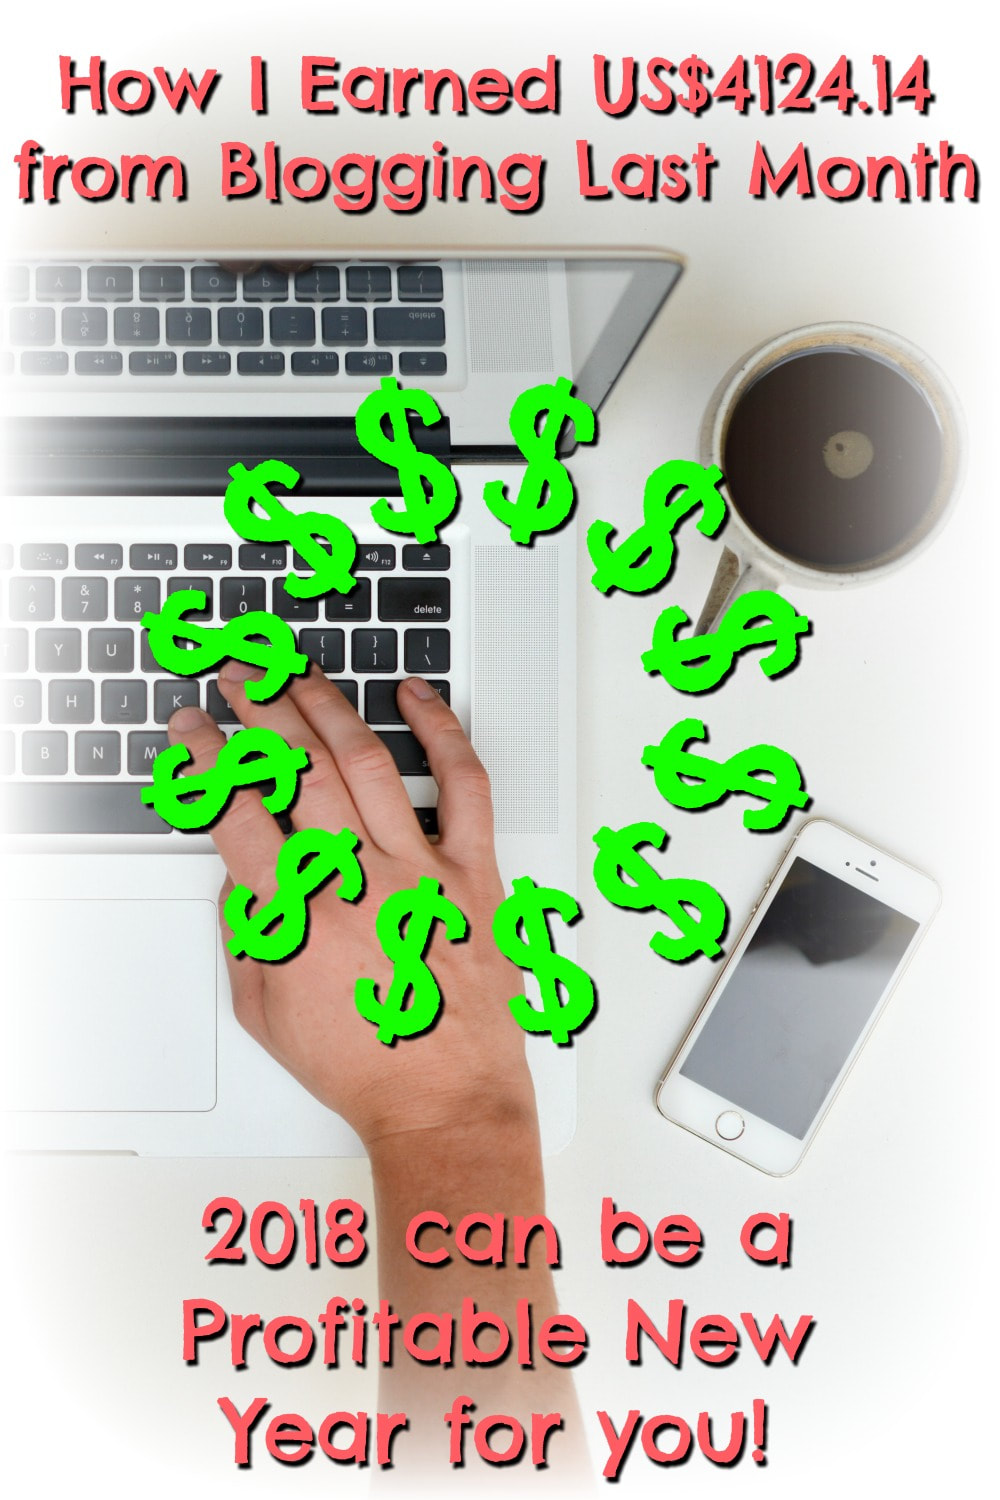 You are reading: Blog Income Report: How I Earned US$4124.14 from Blogging Last Month and How 2018 can be a Profitable New Year for you